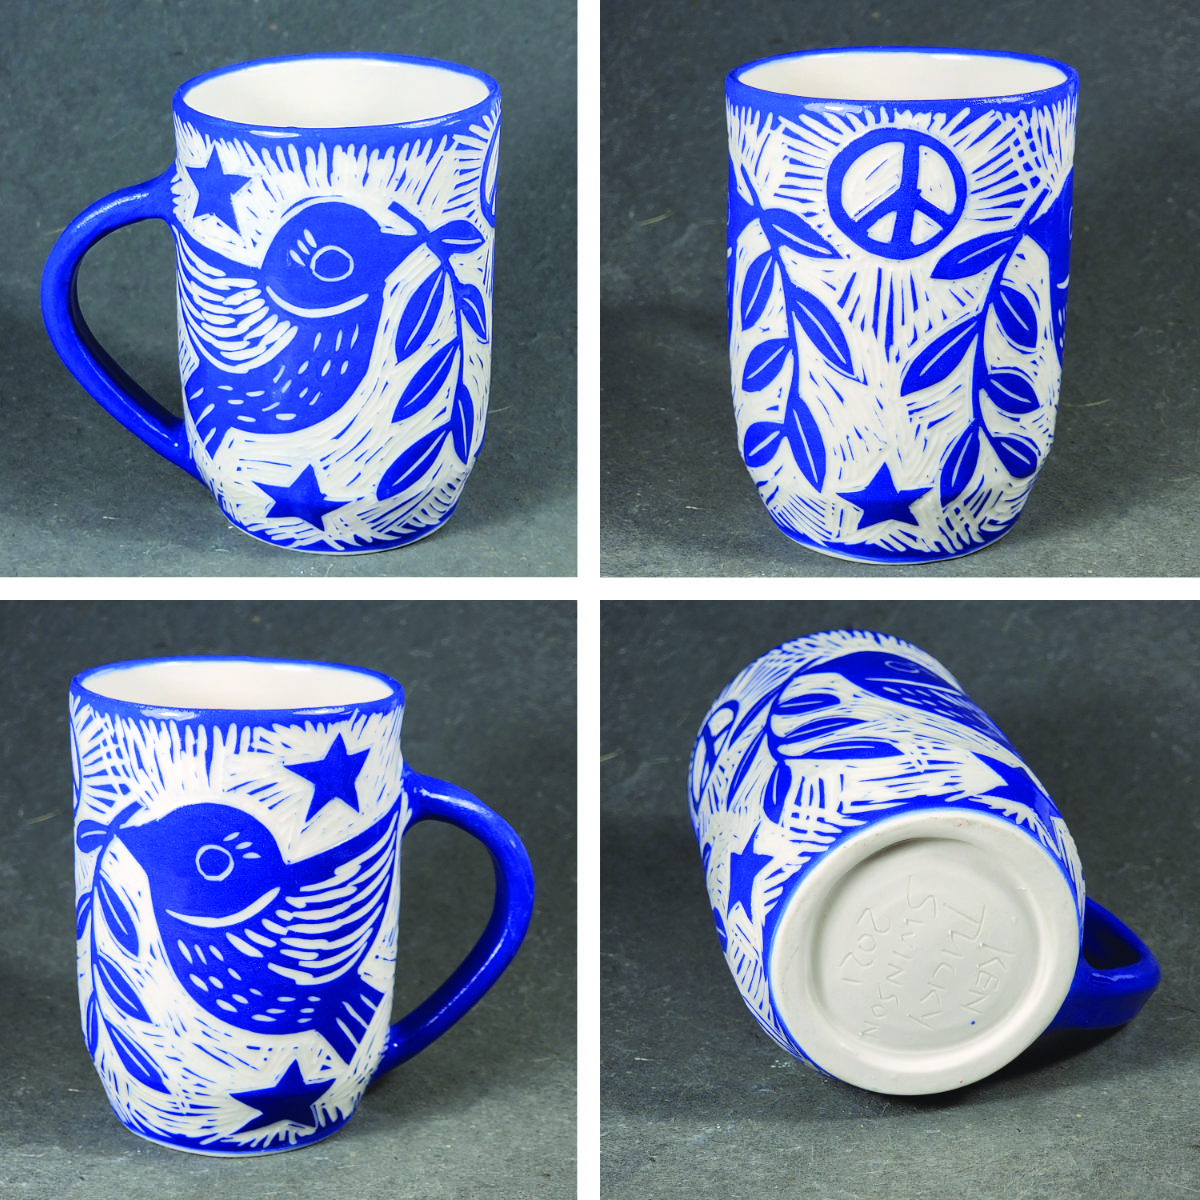 folk art style porcelain cup with birds and peace symbol